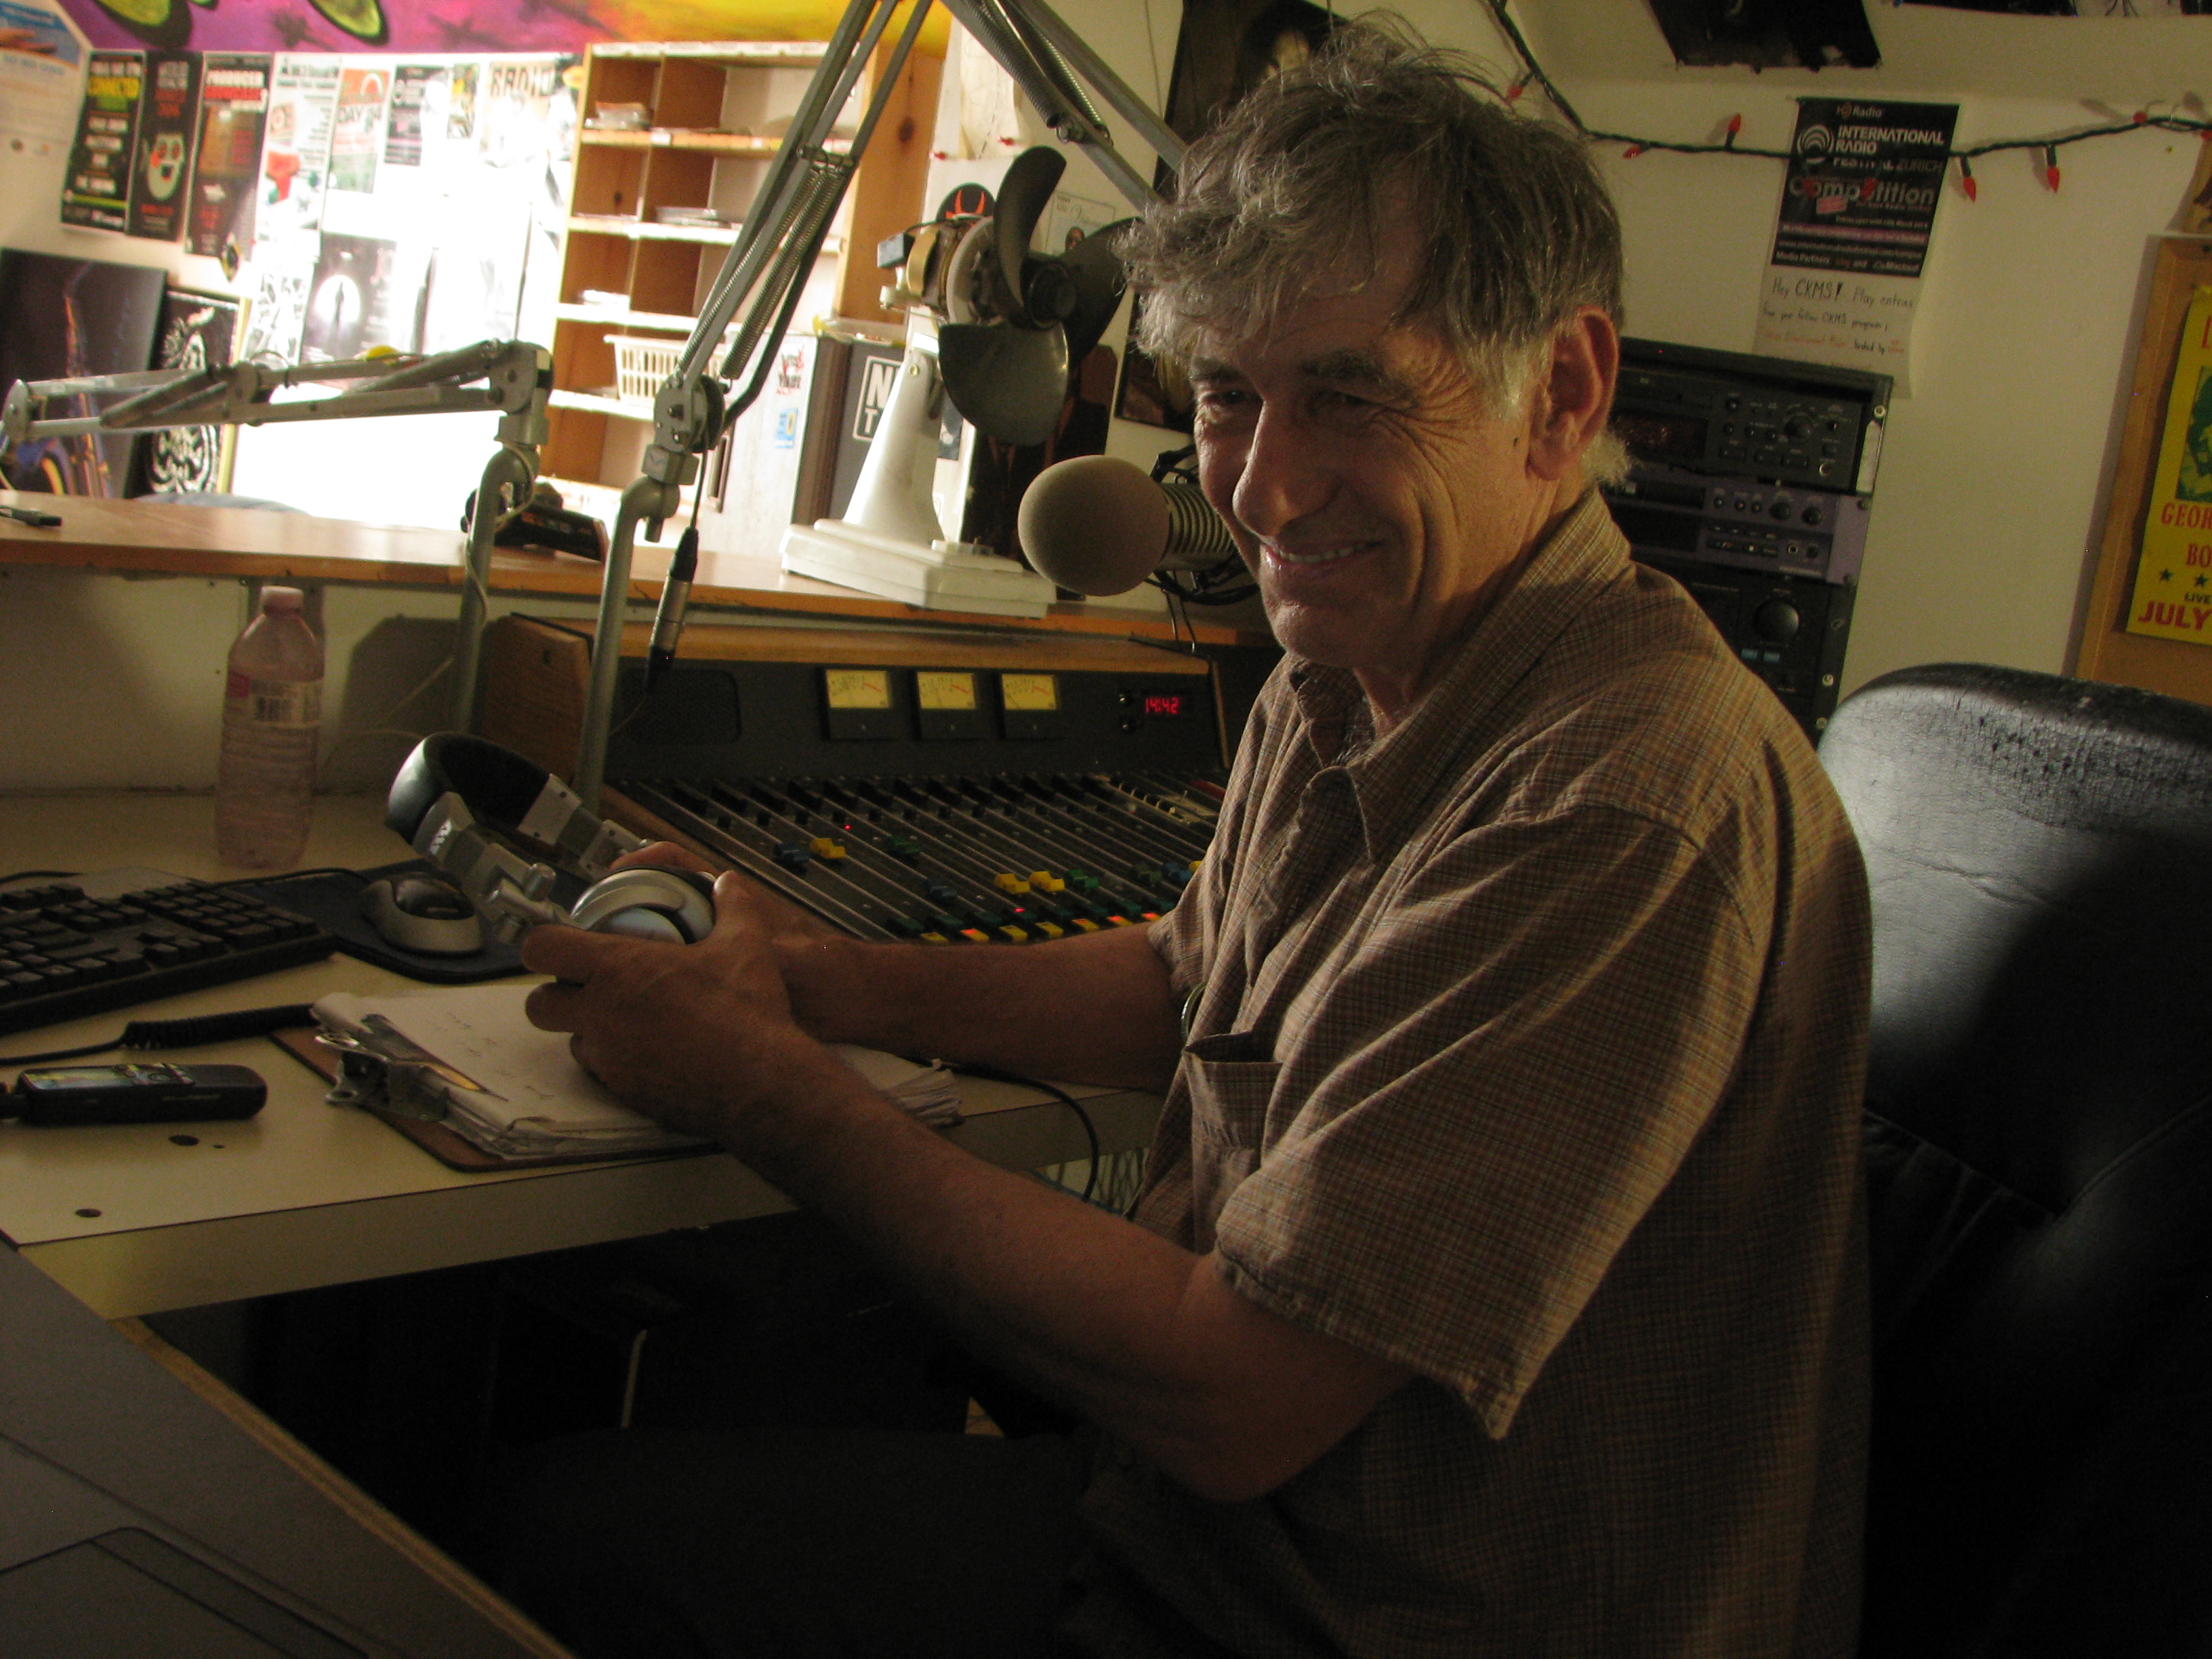 Jeff Stager in the control booth of SoundFM